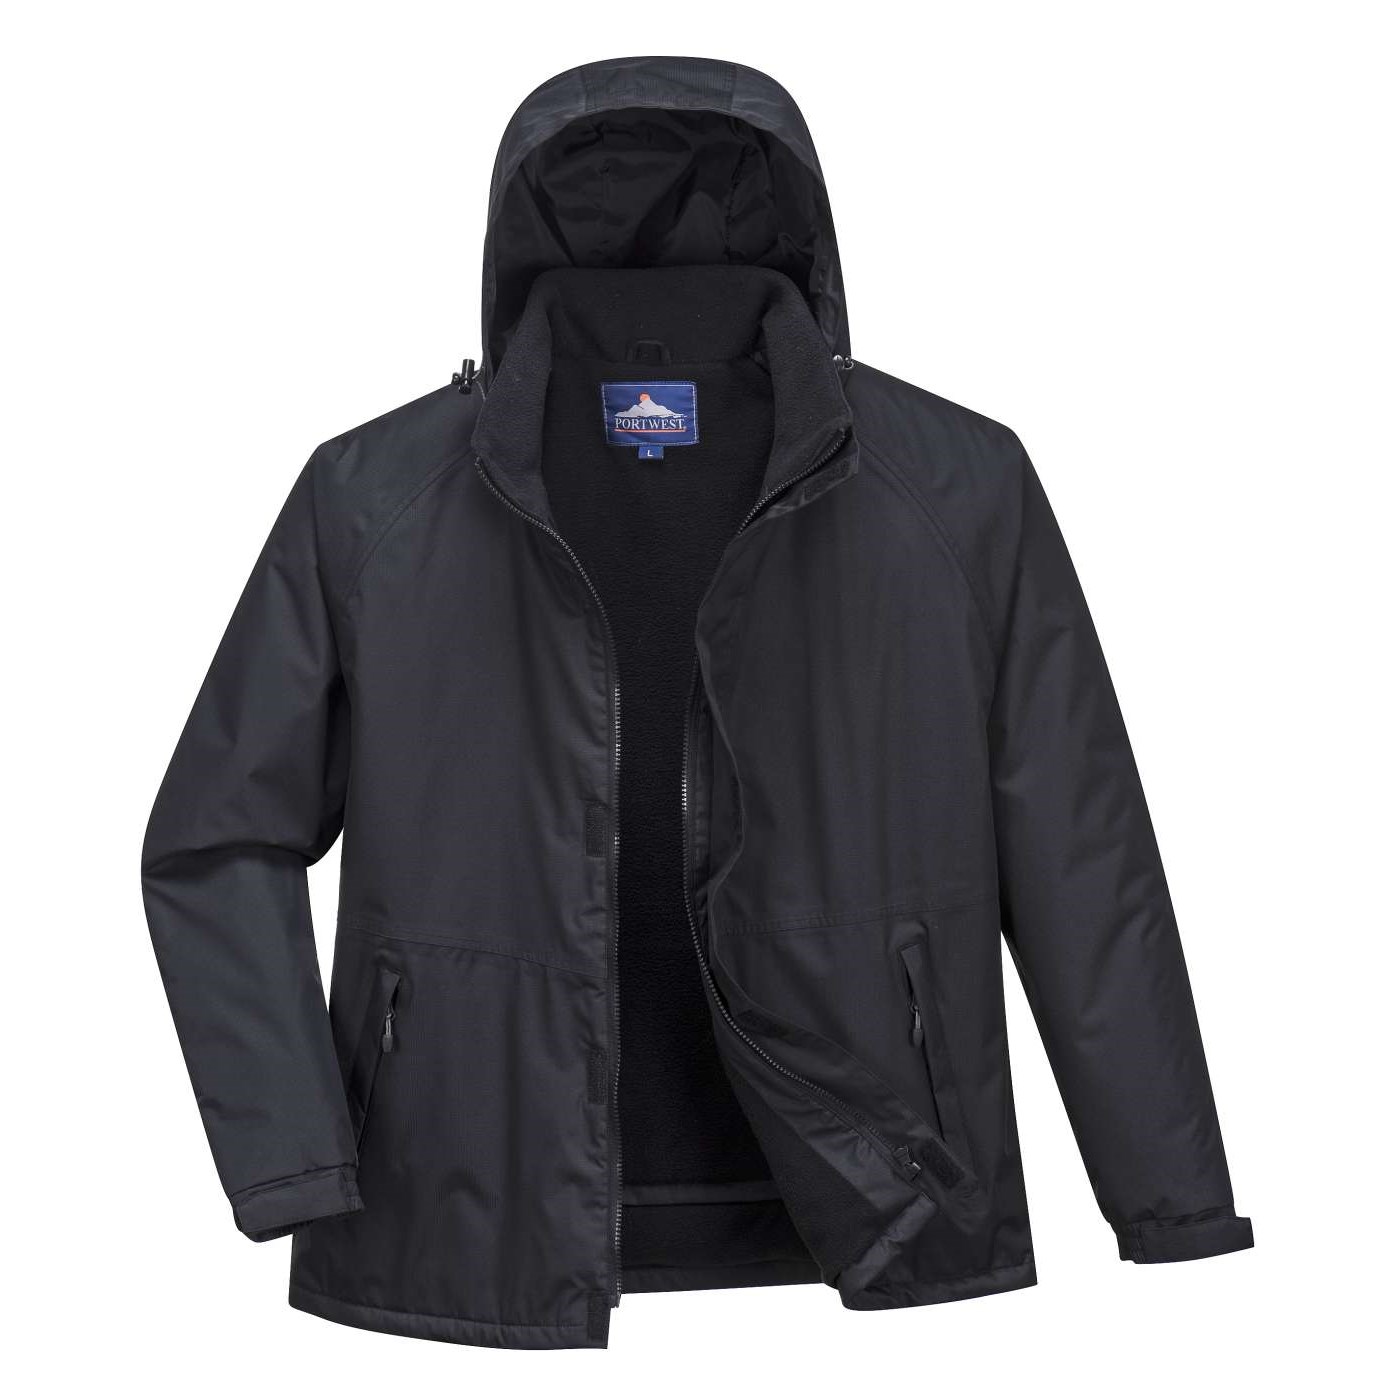 Portwest Adult's Limax Insulated Ripstop Jacket